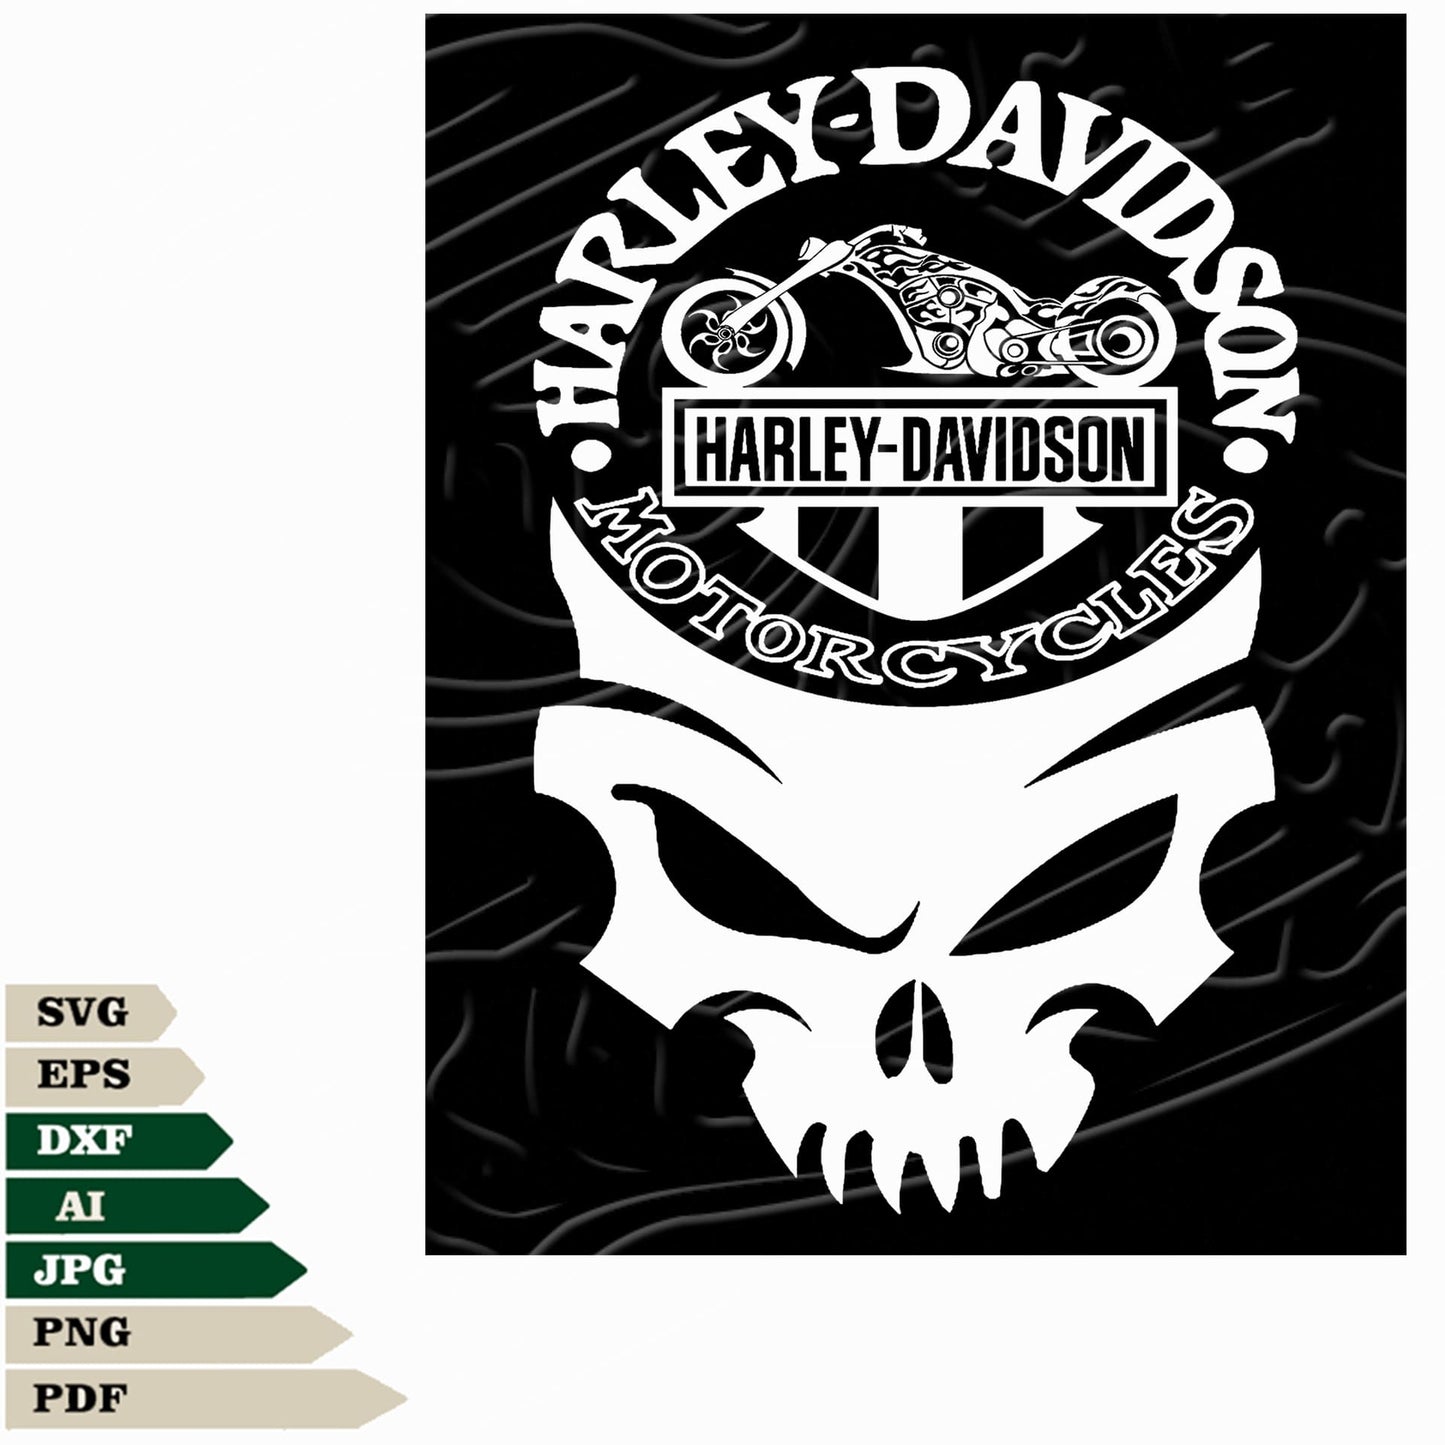 This Skull Harley Davidson Svg File Set Contains Motorcycles Harley Davidson Svg Design, Logo Png, Vector Graphics, Skull Design For Tattooing And SVG Format For Cricut Machines. Perfect For Creating Custom Harley Davidson Designs.